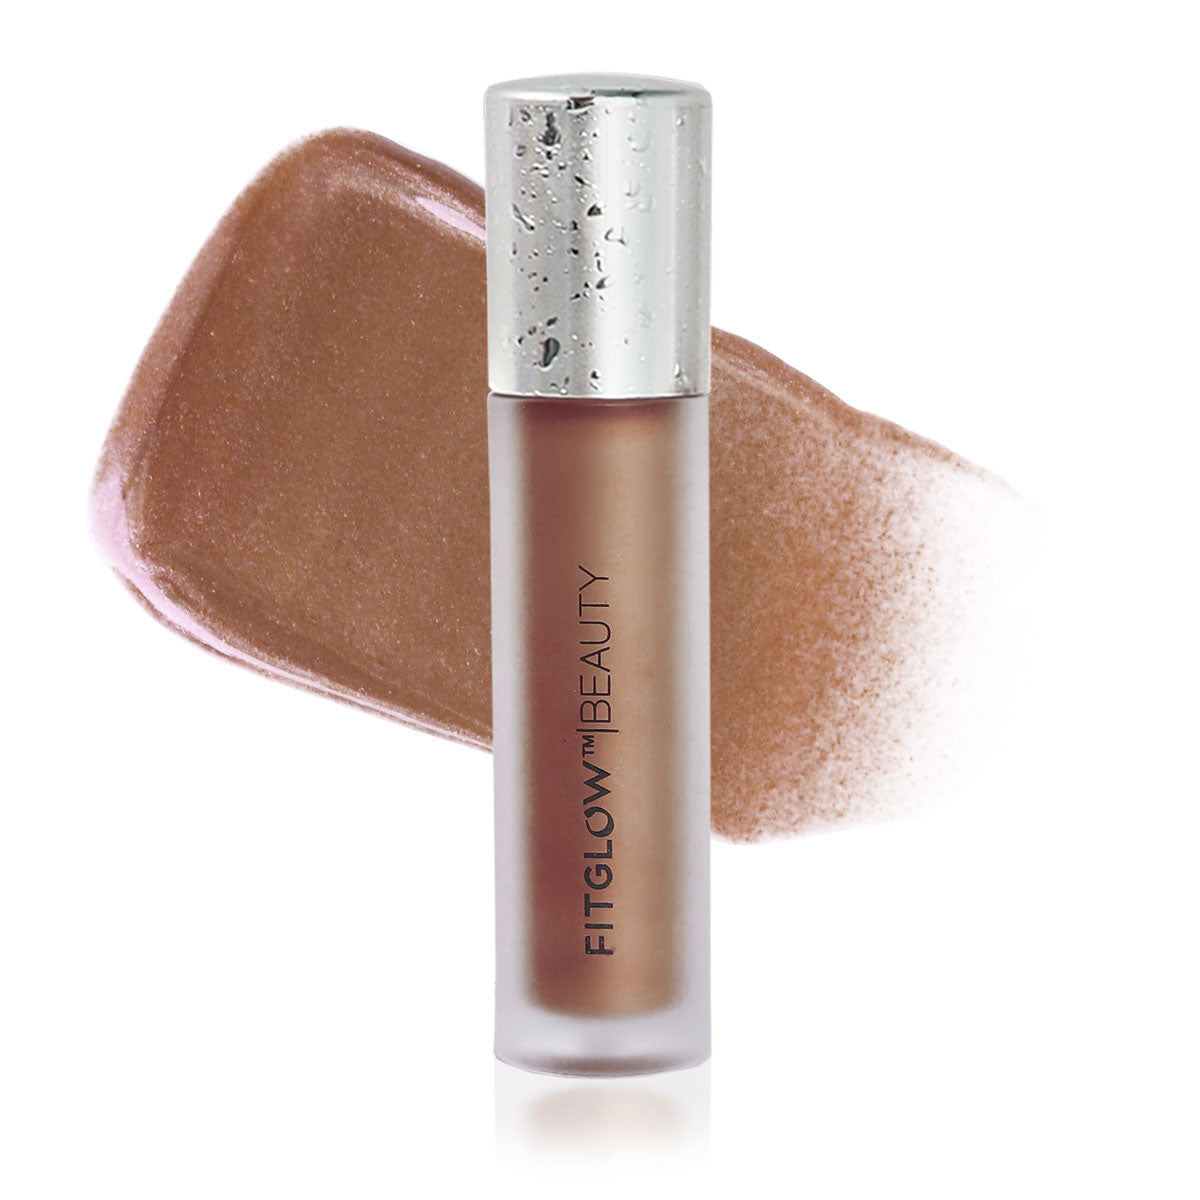 Fitglow Beauty Lip Colour Serum - Lux